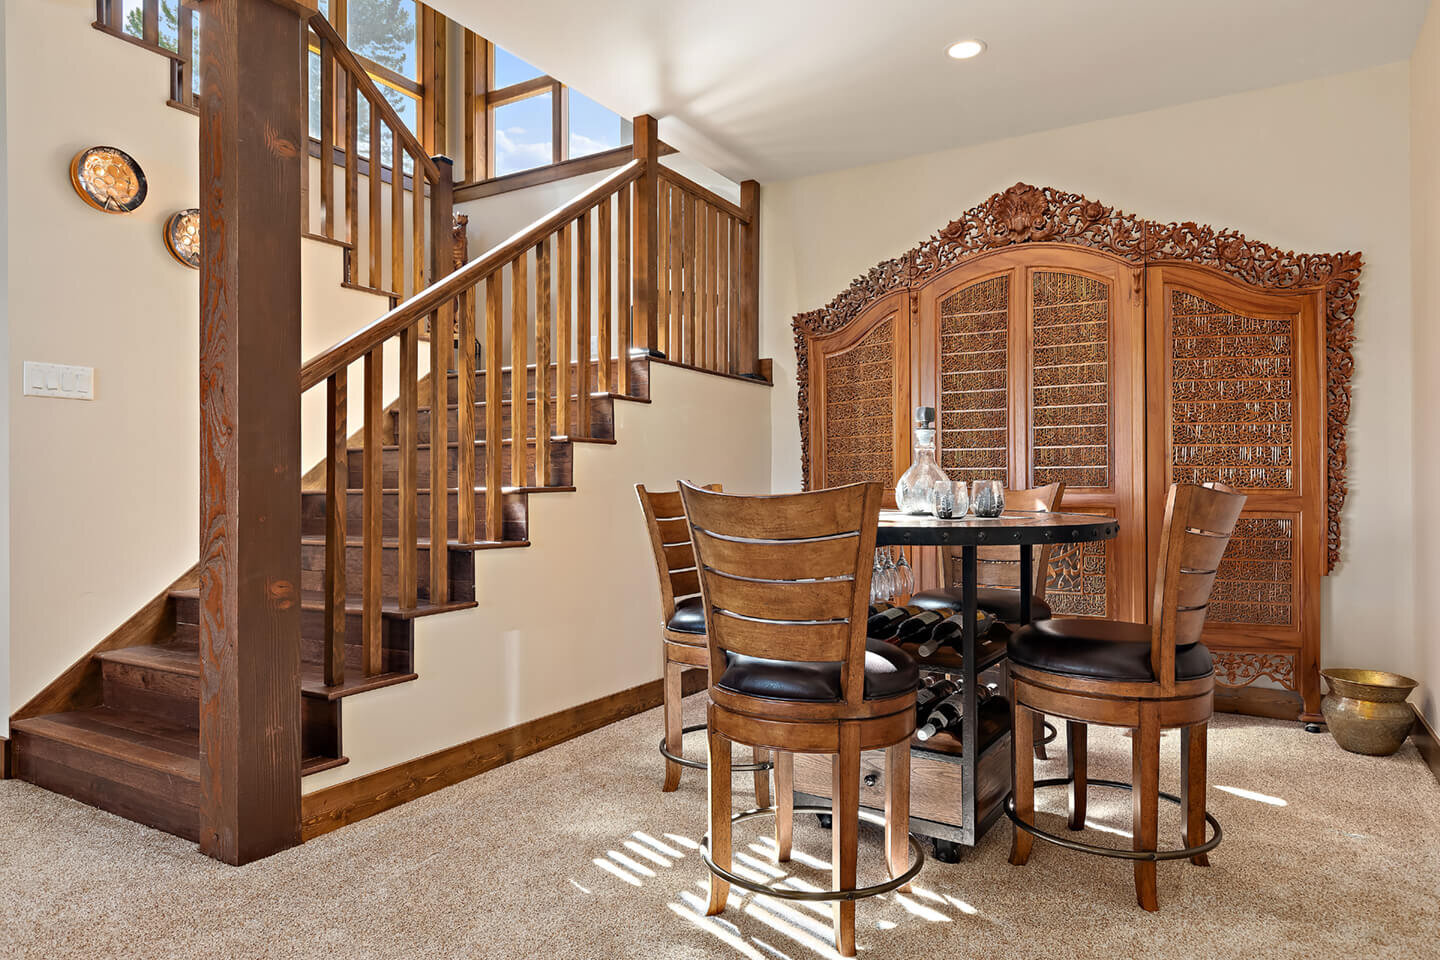 Staircase leading to basement and bar area